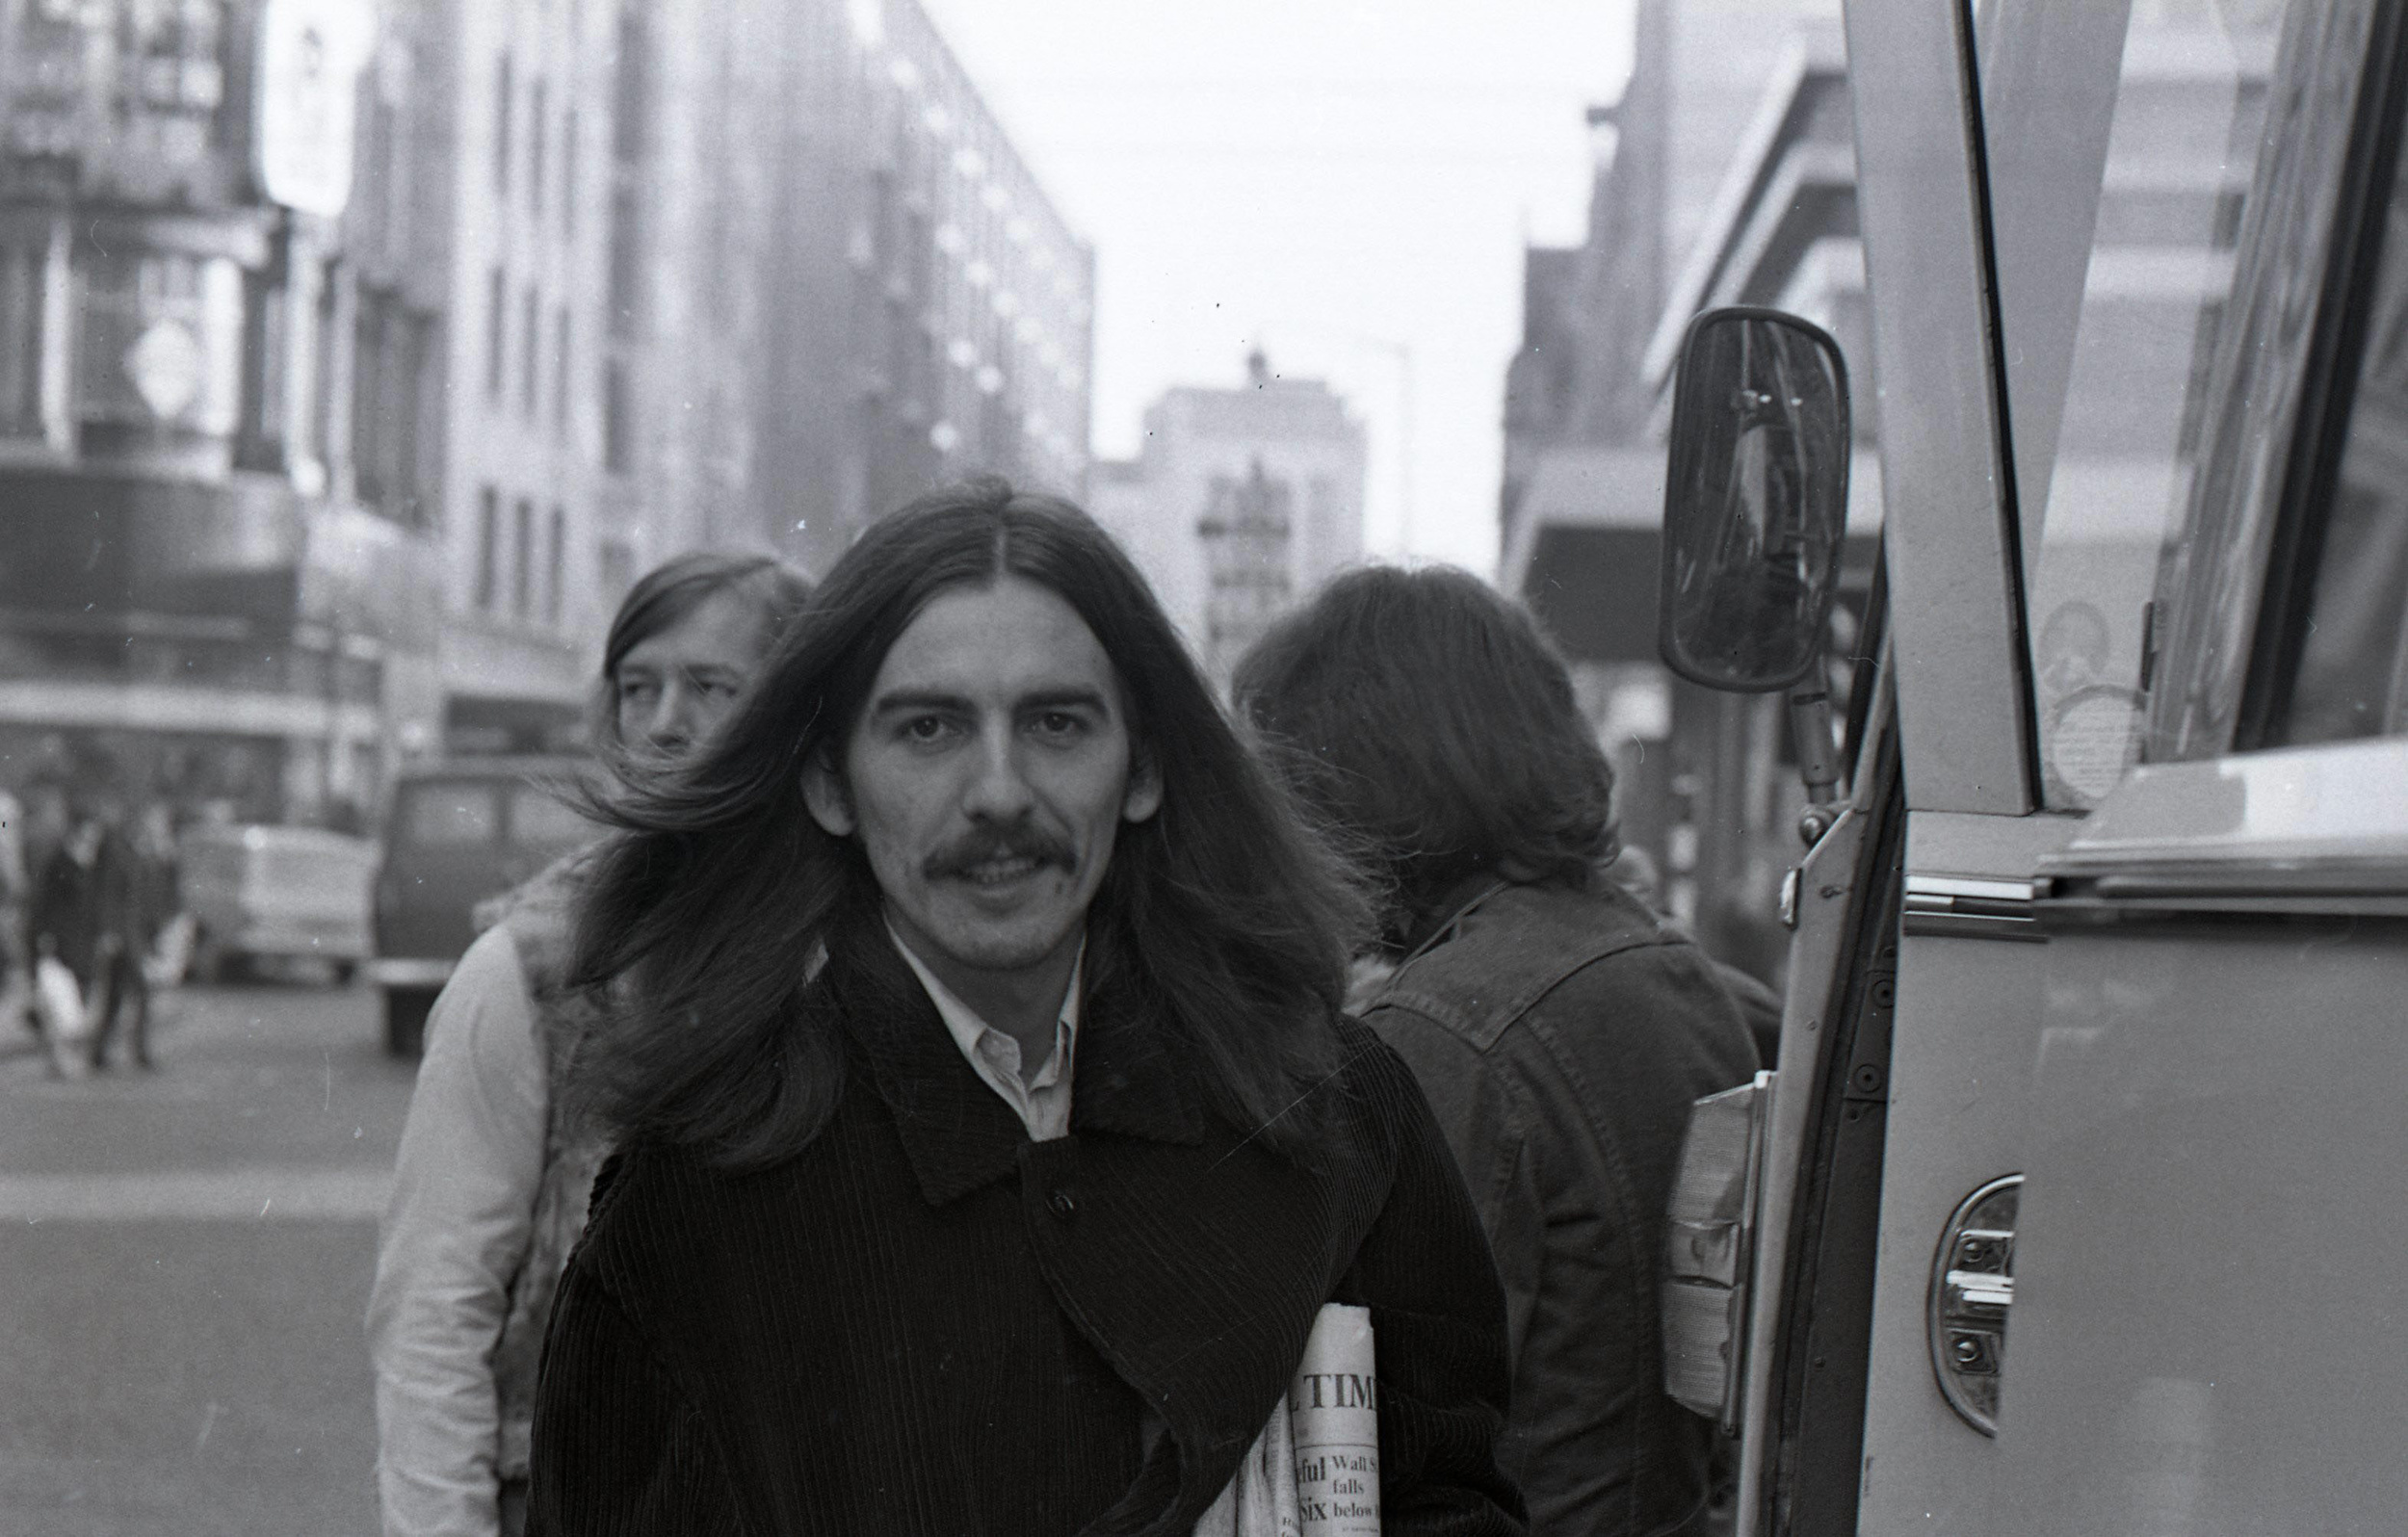 <p>George Harrison finally realized his songwriting potential with this blisteringly emotional track on “The White Album," which features an extended guitar solo from Eric Clapton that ranks among the esteemed musician’s finest work. As The Beatles began to grow further apart, Harrison turned inward; while his band mates dabbled in Indian spiritualism, Harrison firmly embraced it and poured all of his hopes and frustrations into this song. It was a stirring preview of what he’d accomplish with “All Things Must Pass."</p><p>You may also like: <a href='https://www.yardbarker.com/entertainment/articles/meals_about_nothing_25_memorable_foods_featured_in_seinfeld/s1__38492425'>Meals about nothing: 25 memorable foods featured in “Seinfeld”</a></p>